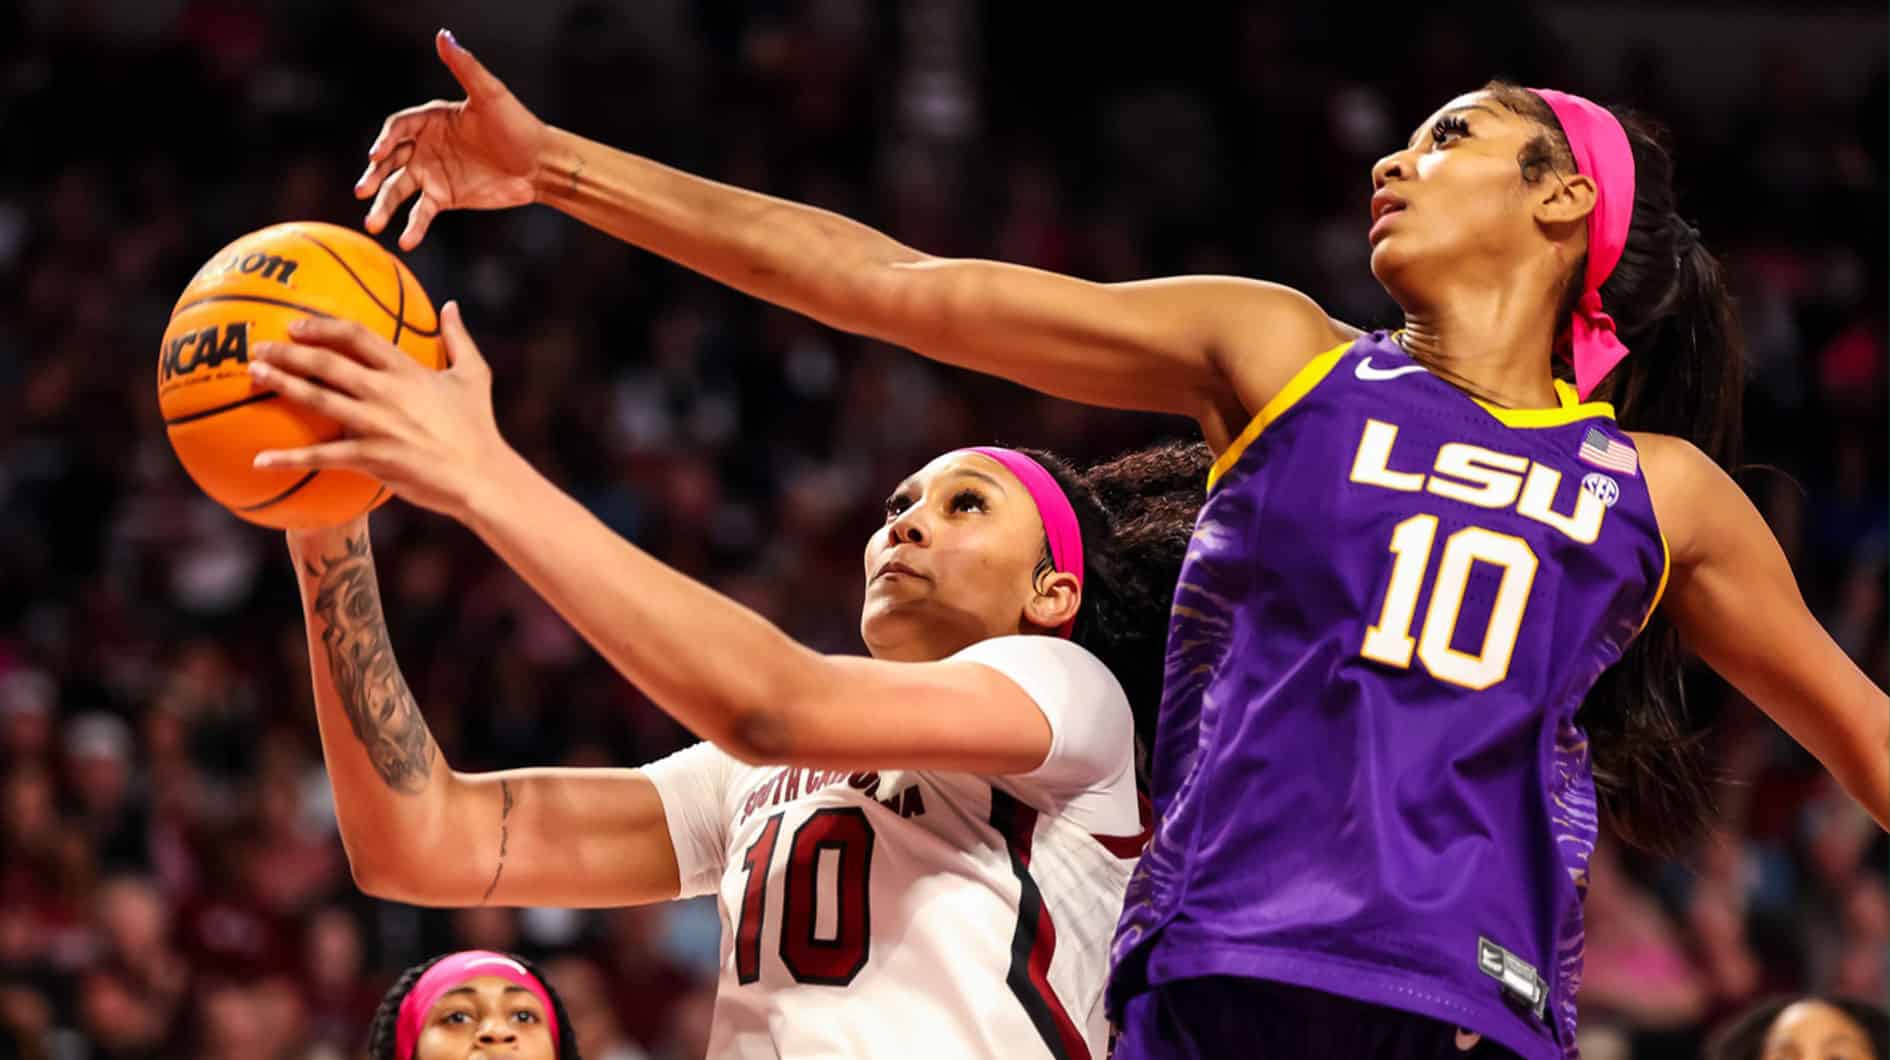 South Carolina Gamecocks center Kamilla Cardoso (10) drives past LSU Lady Tigers forward Angel Reese (10) in the first half